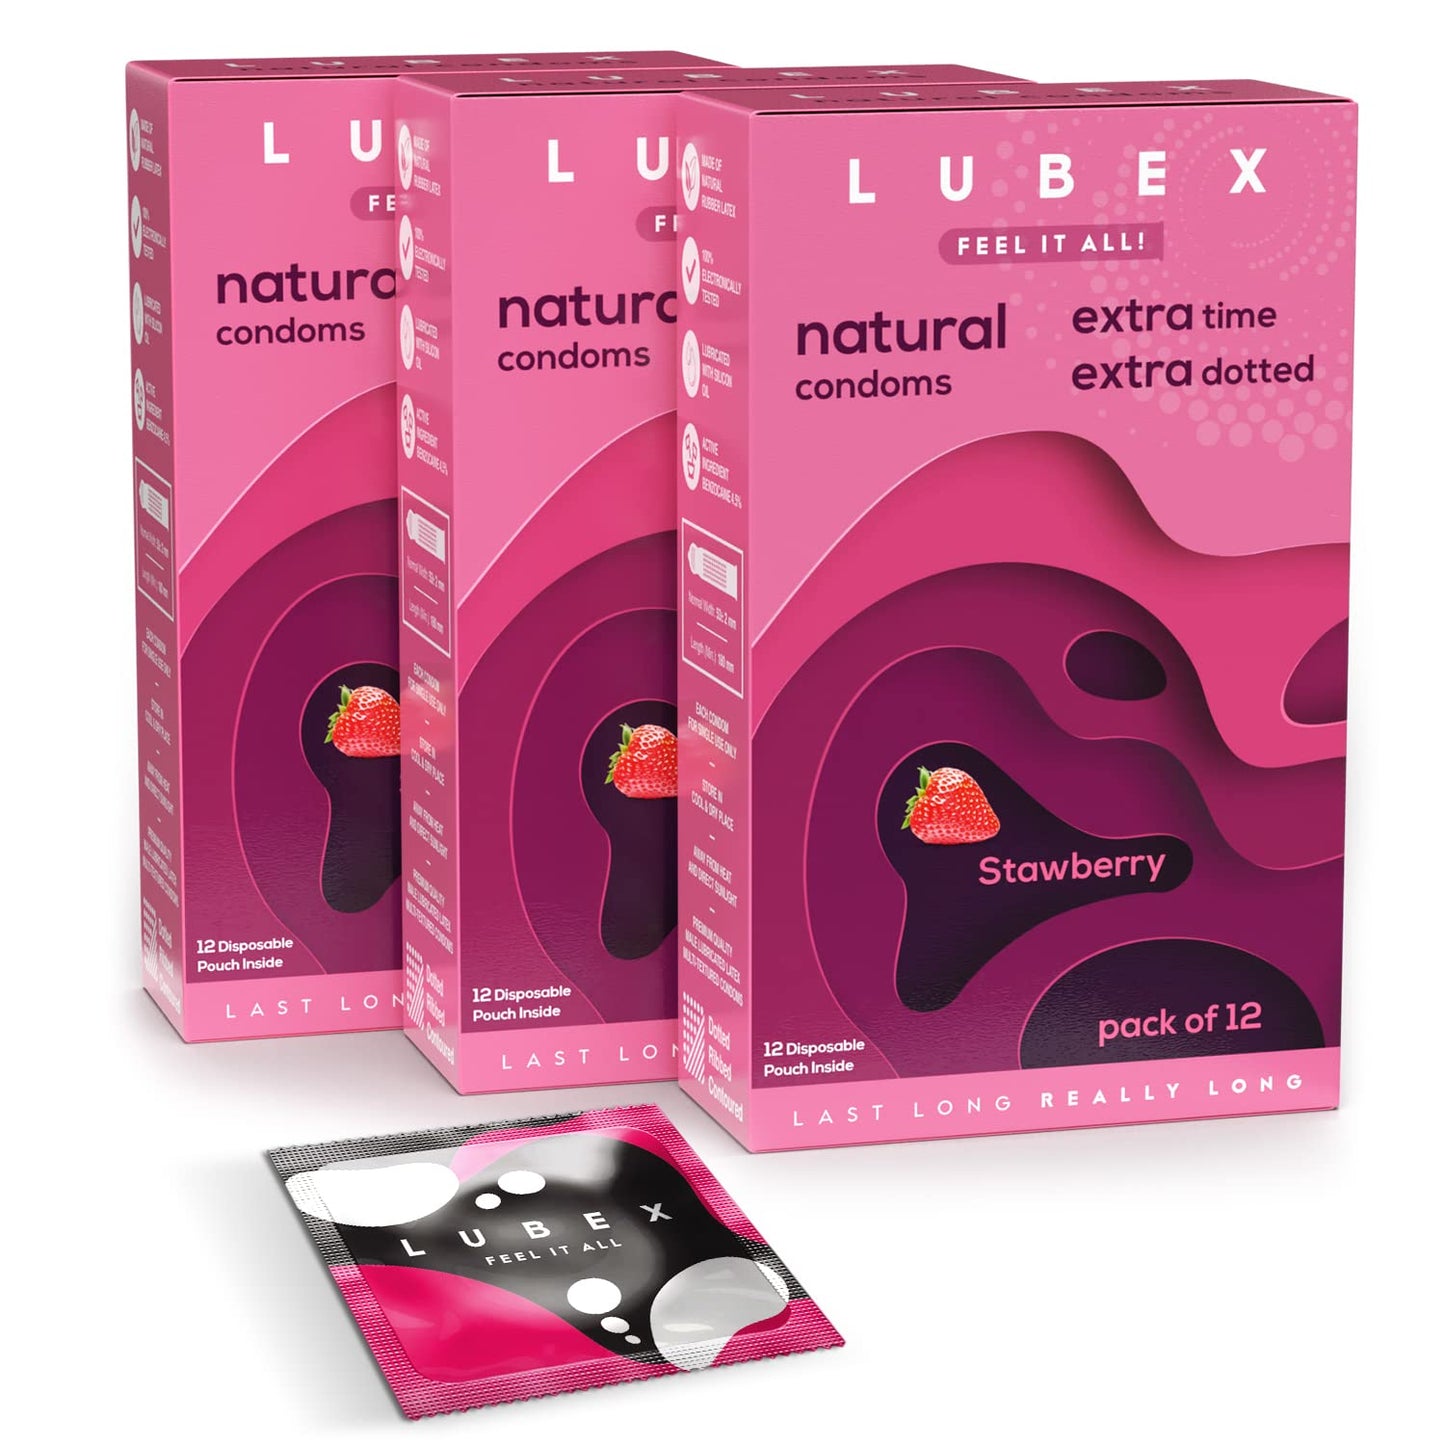 Lubex Condom - 6 in 1 Long Lasting Condoms with Disposable Bags - Ultra Thin & Extra Dotted